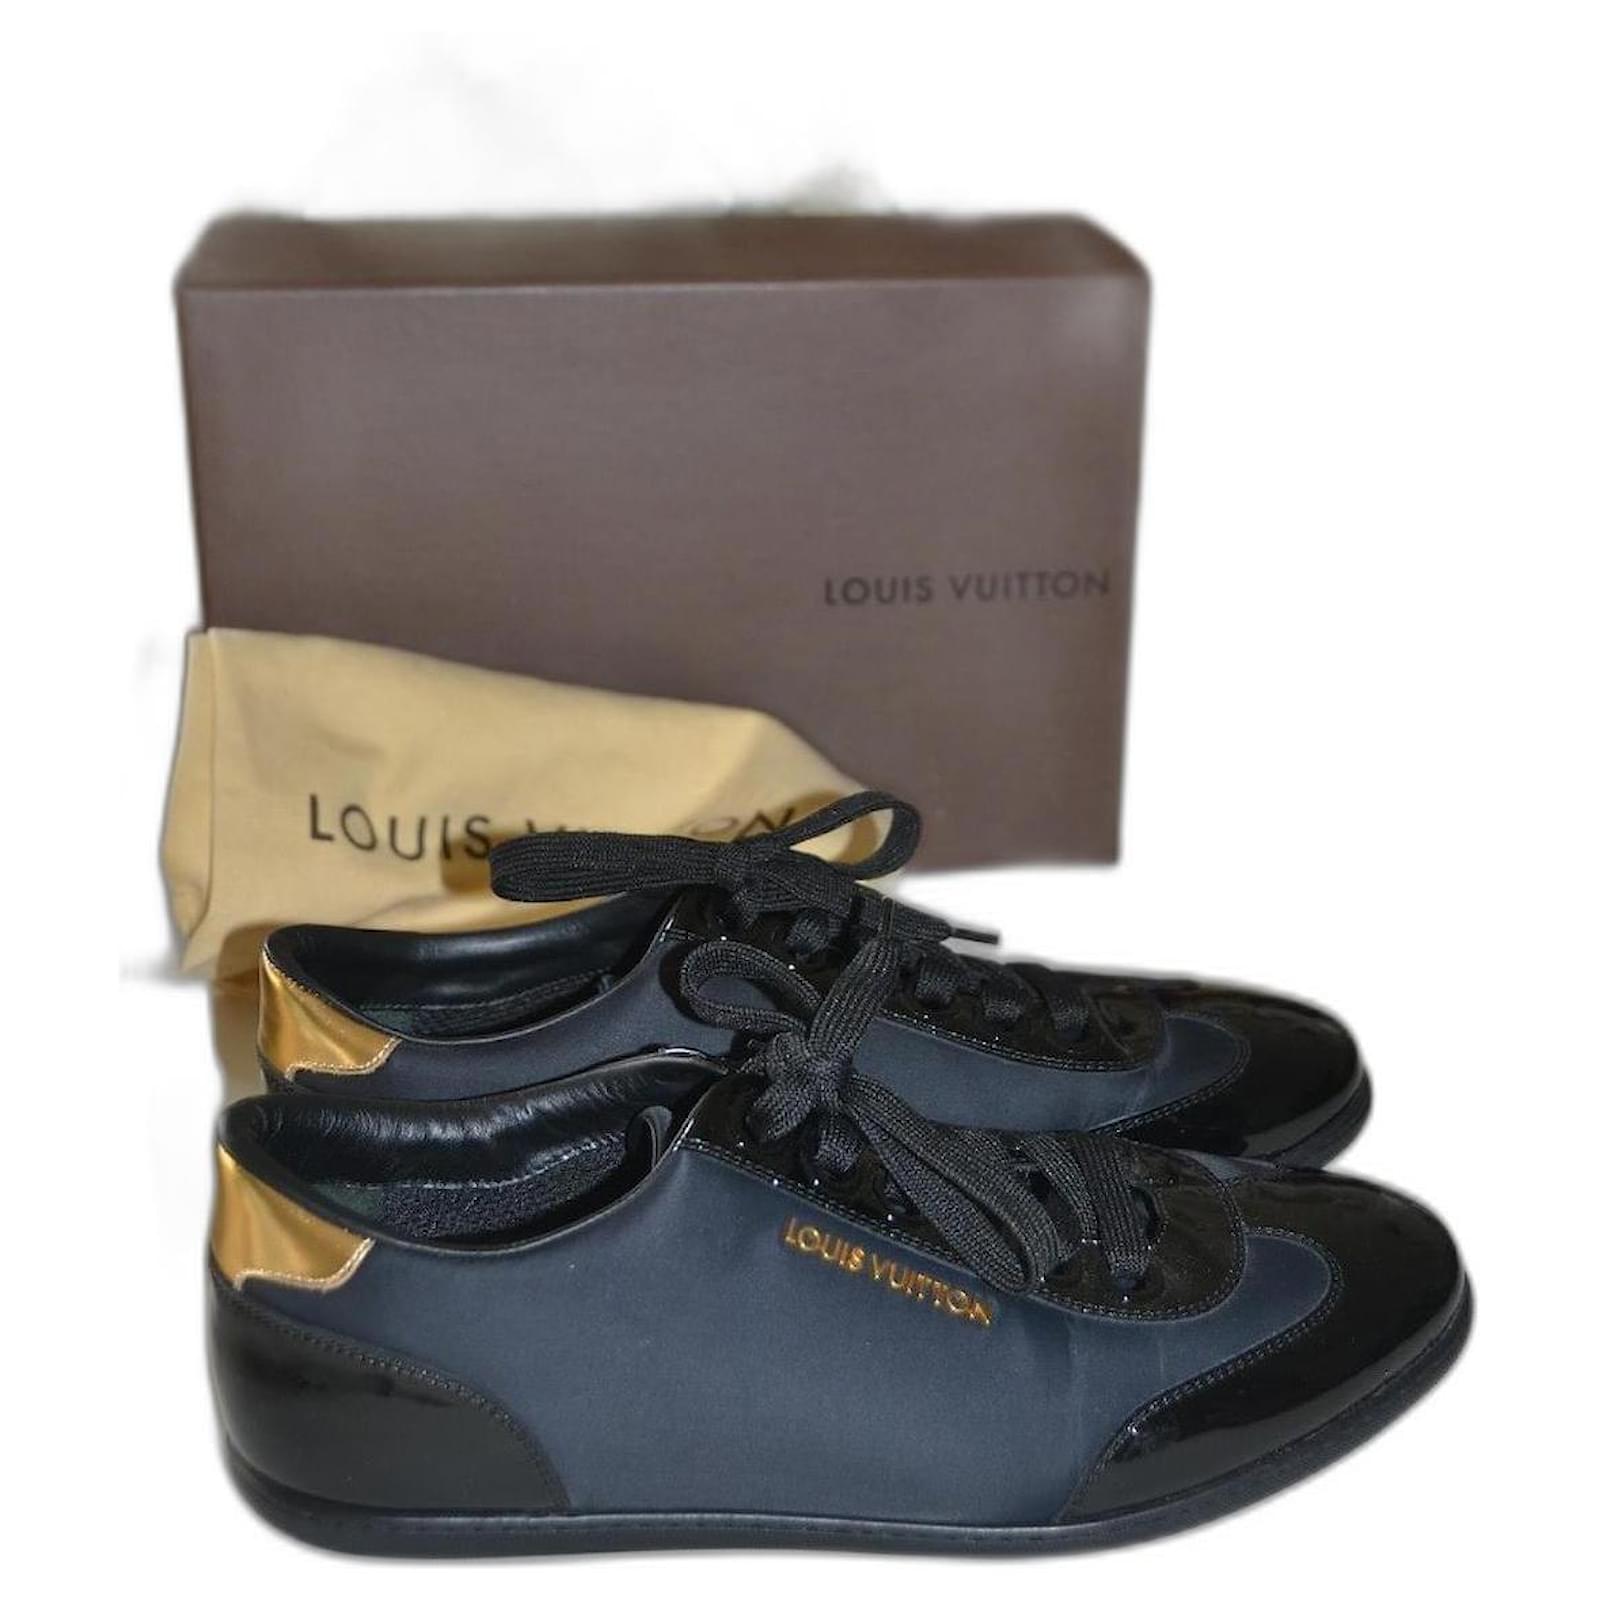 Louis Vuitton, Shoes, Used Louis Vuitton Sneakers